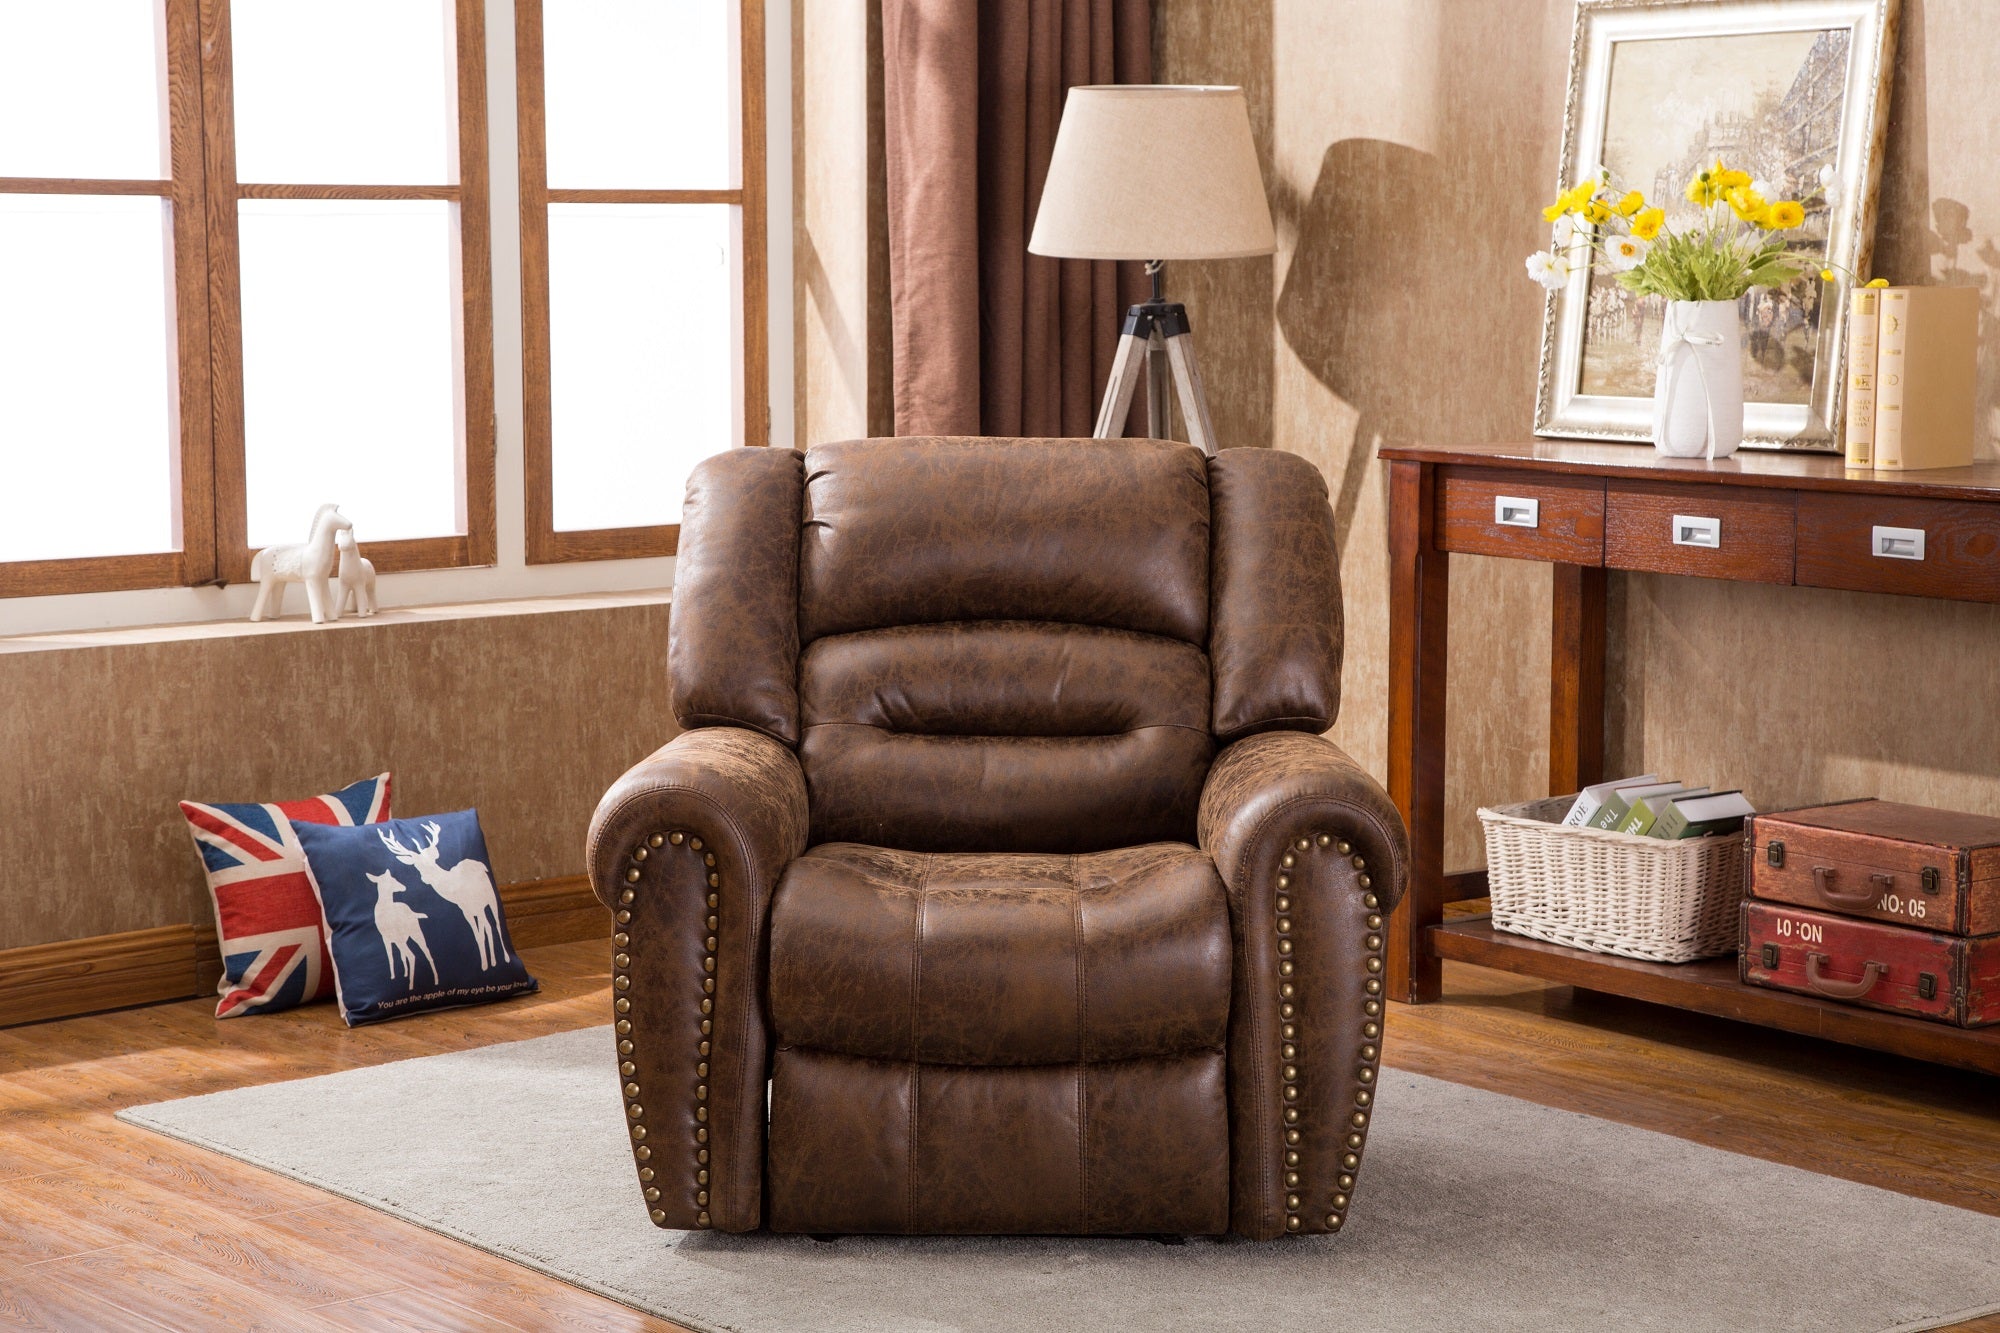 Nut Brown Electric Recliner Chair W/Breathable Bonded Leather